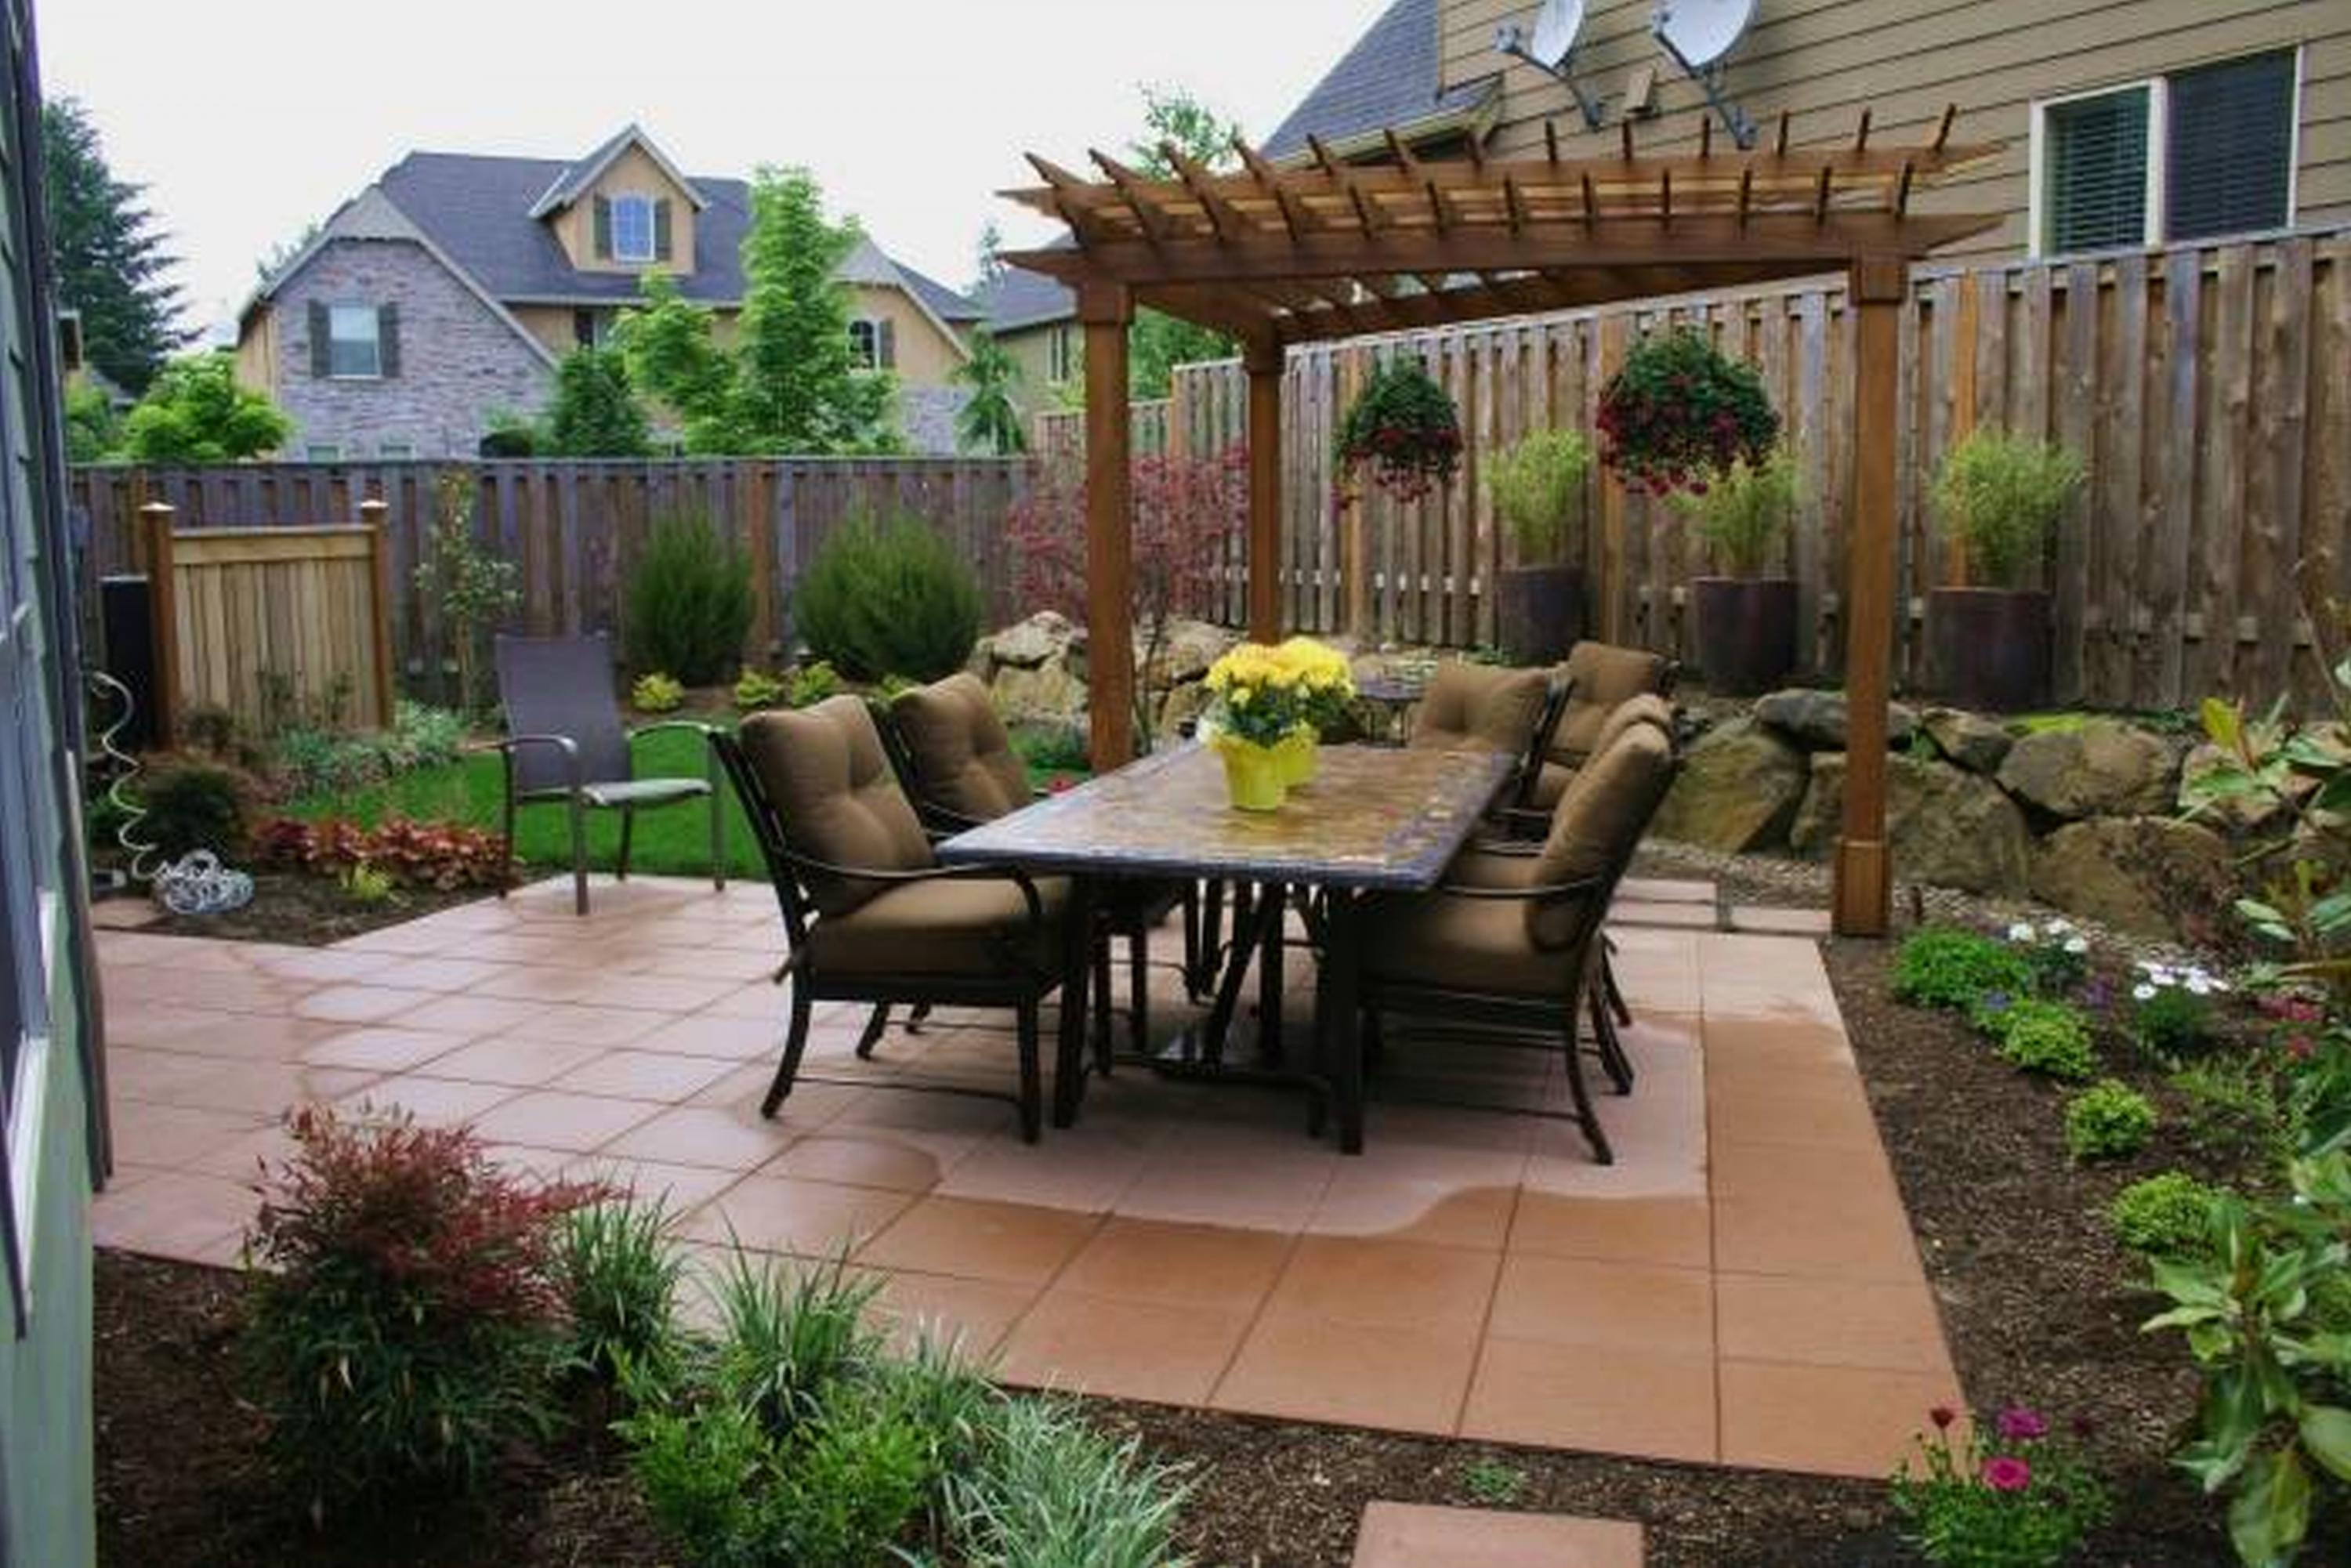 Awesome Gallery Of Interesting Small Backyard Ideas - Interior Design